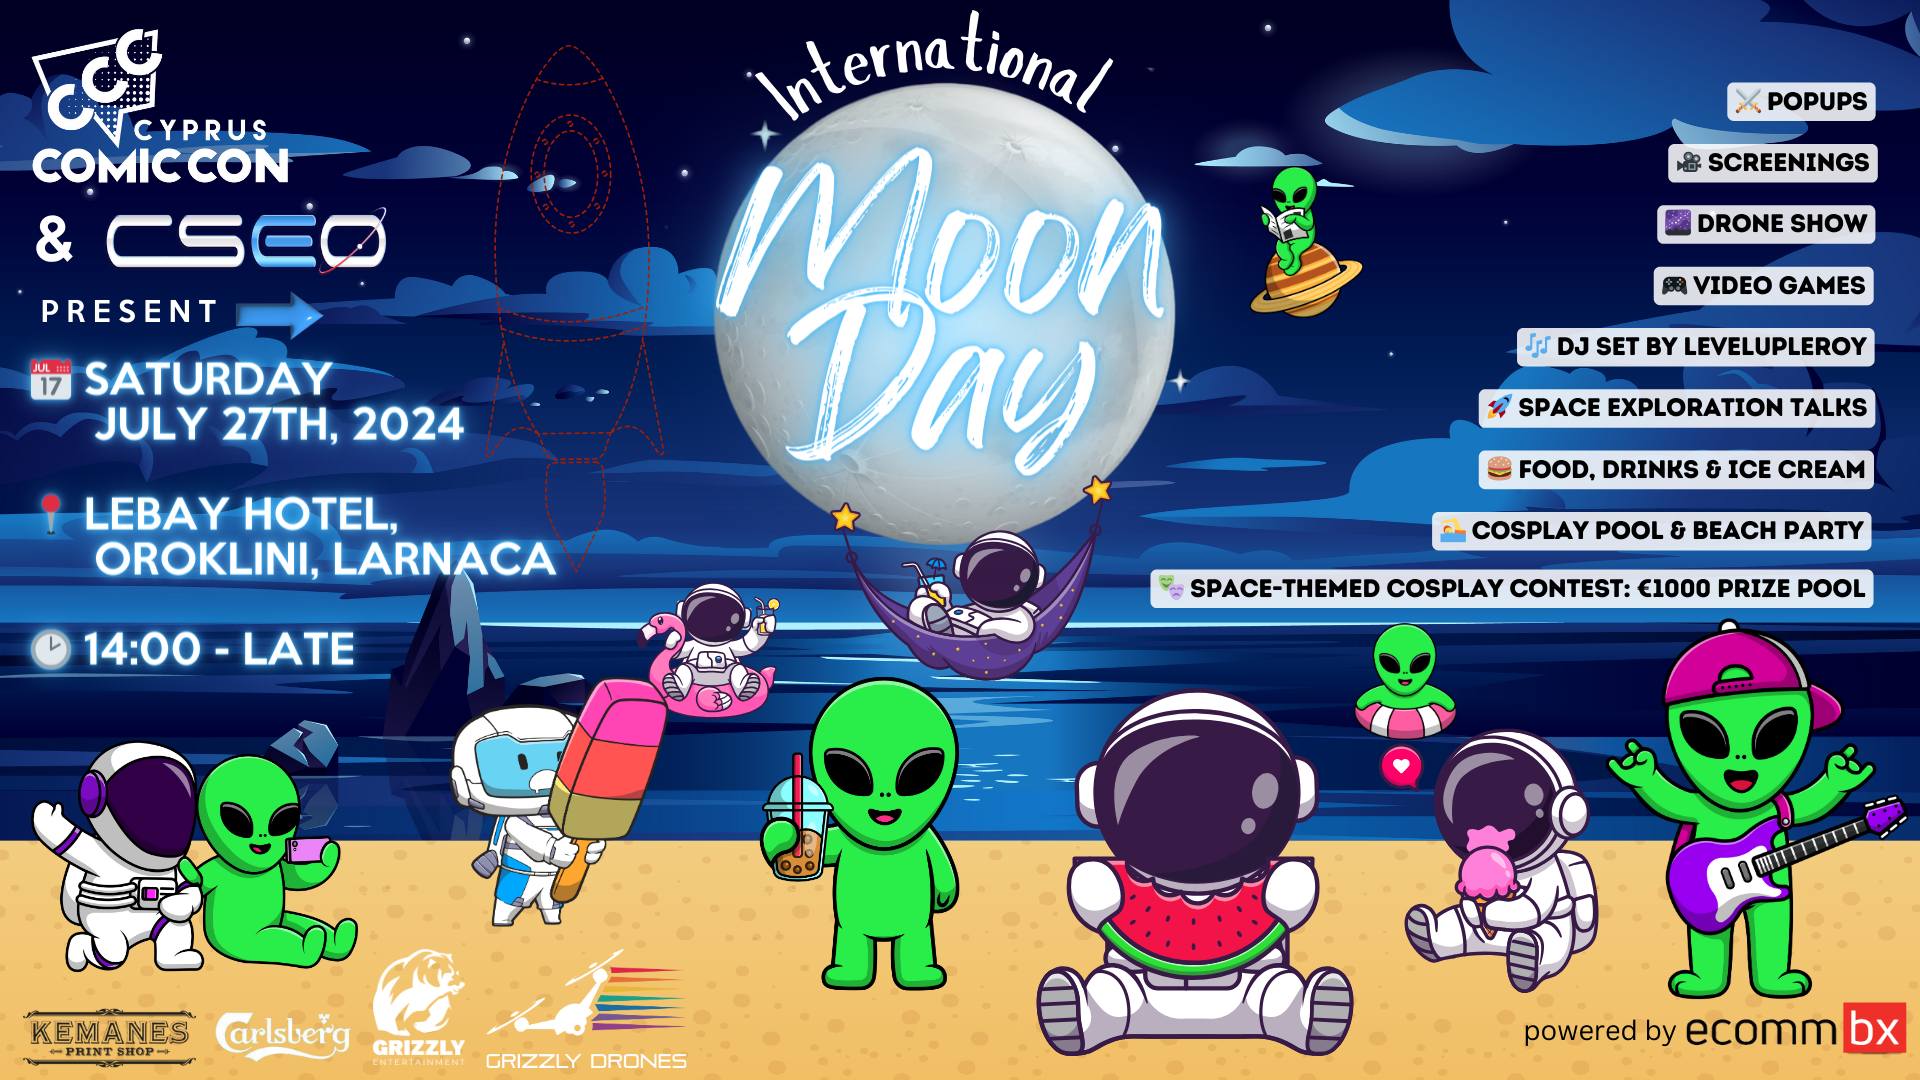 Outer space film night and beach party